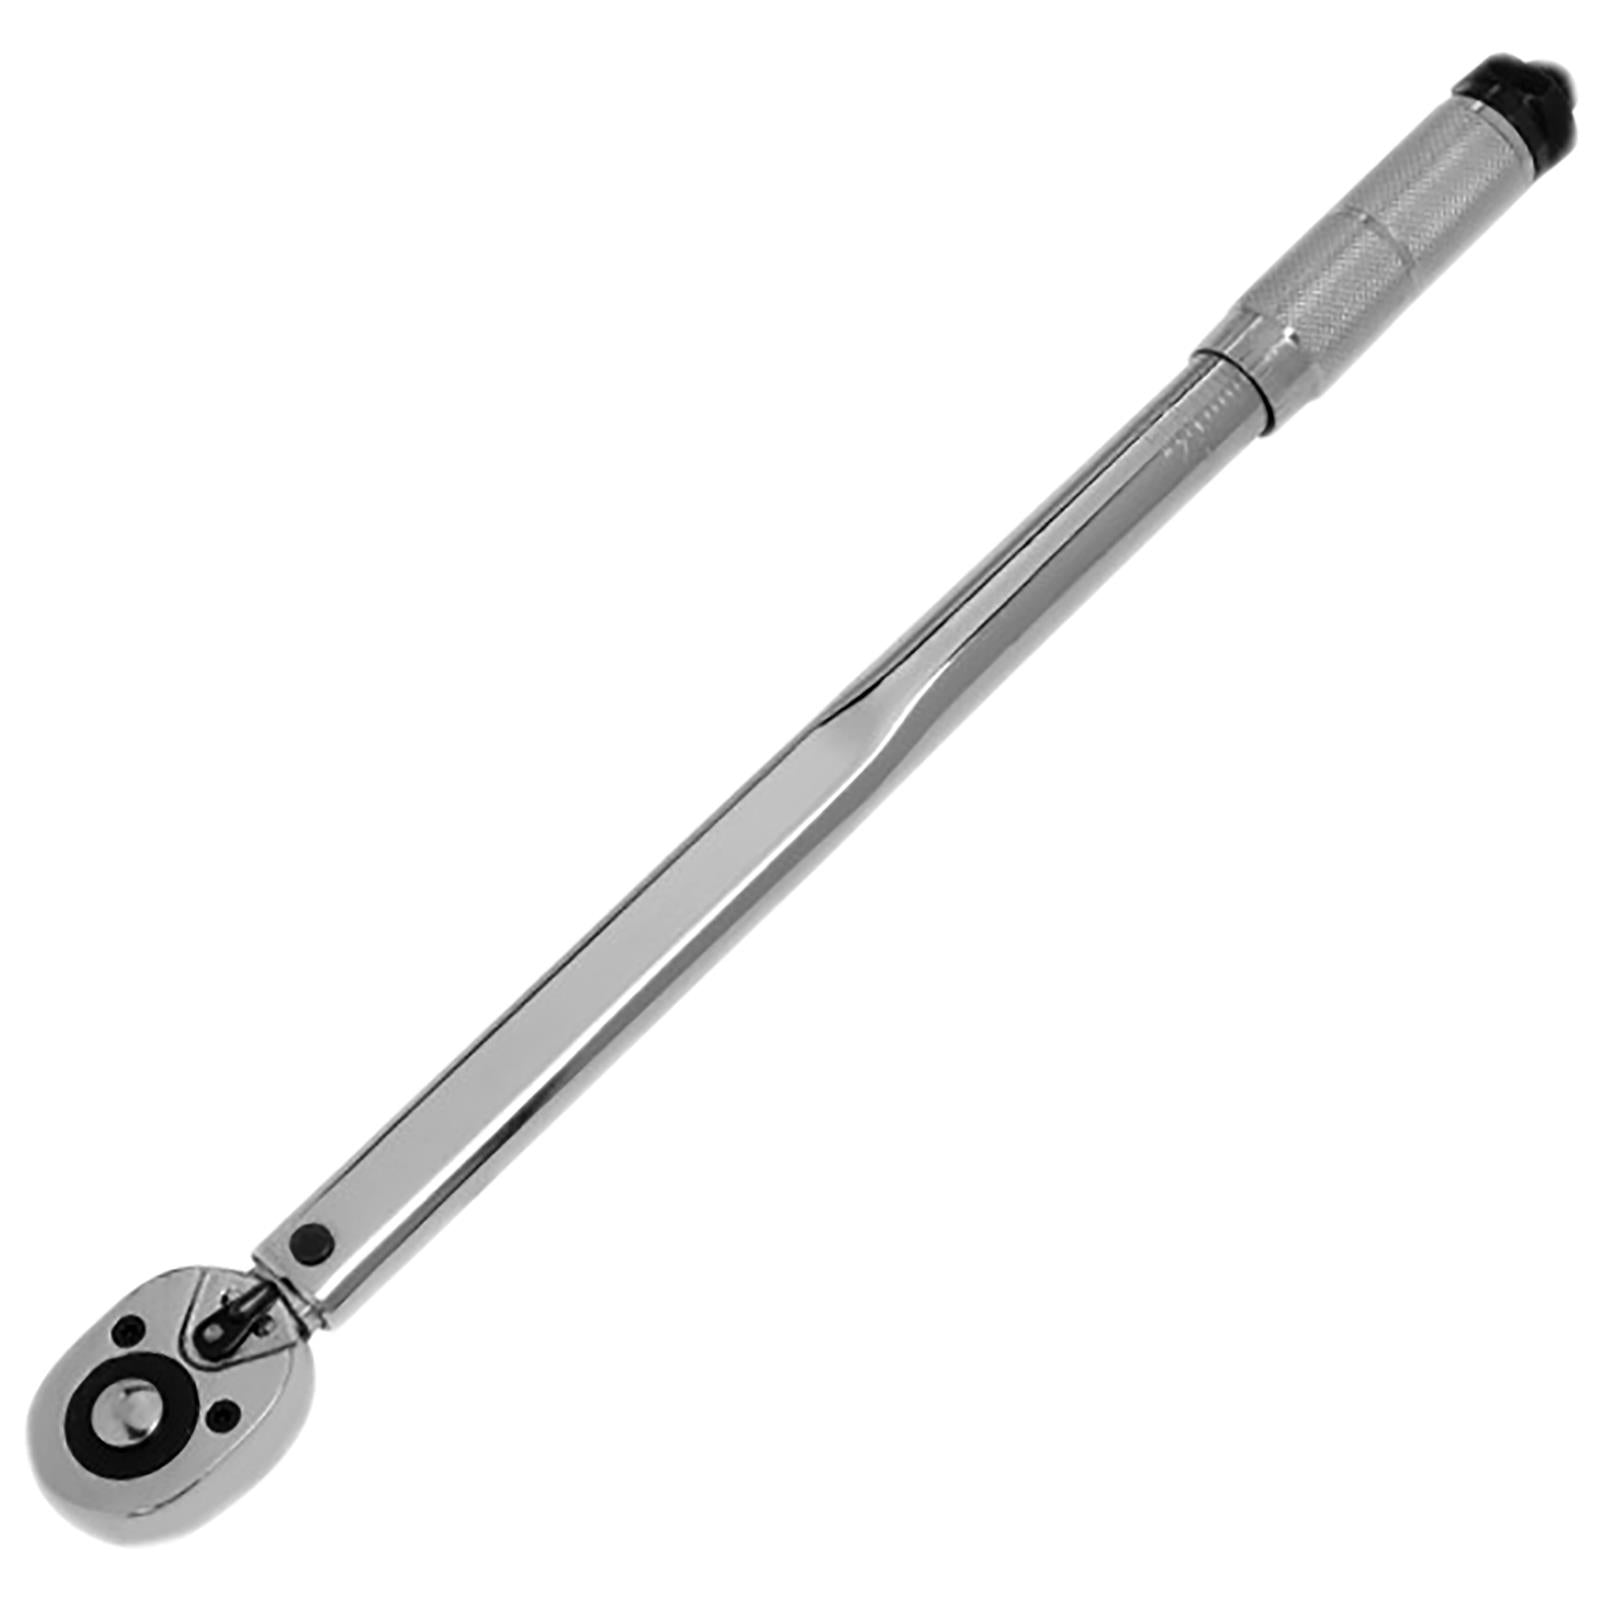 BlueSpot Calibrated Torque Wrench 3/8" Drive 19-110Nm